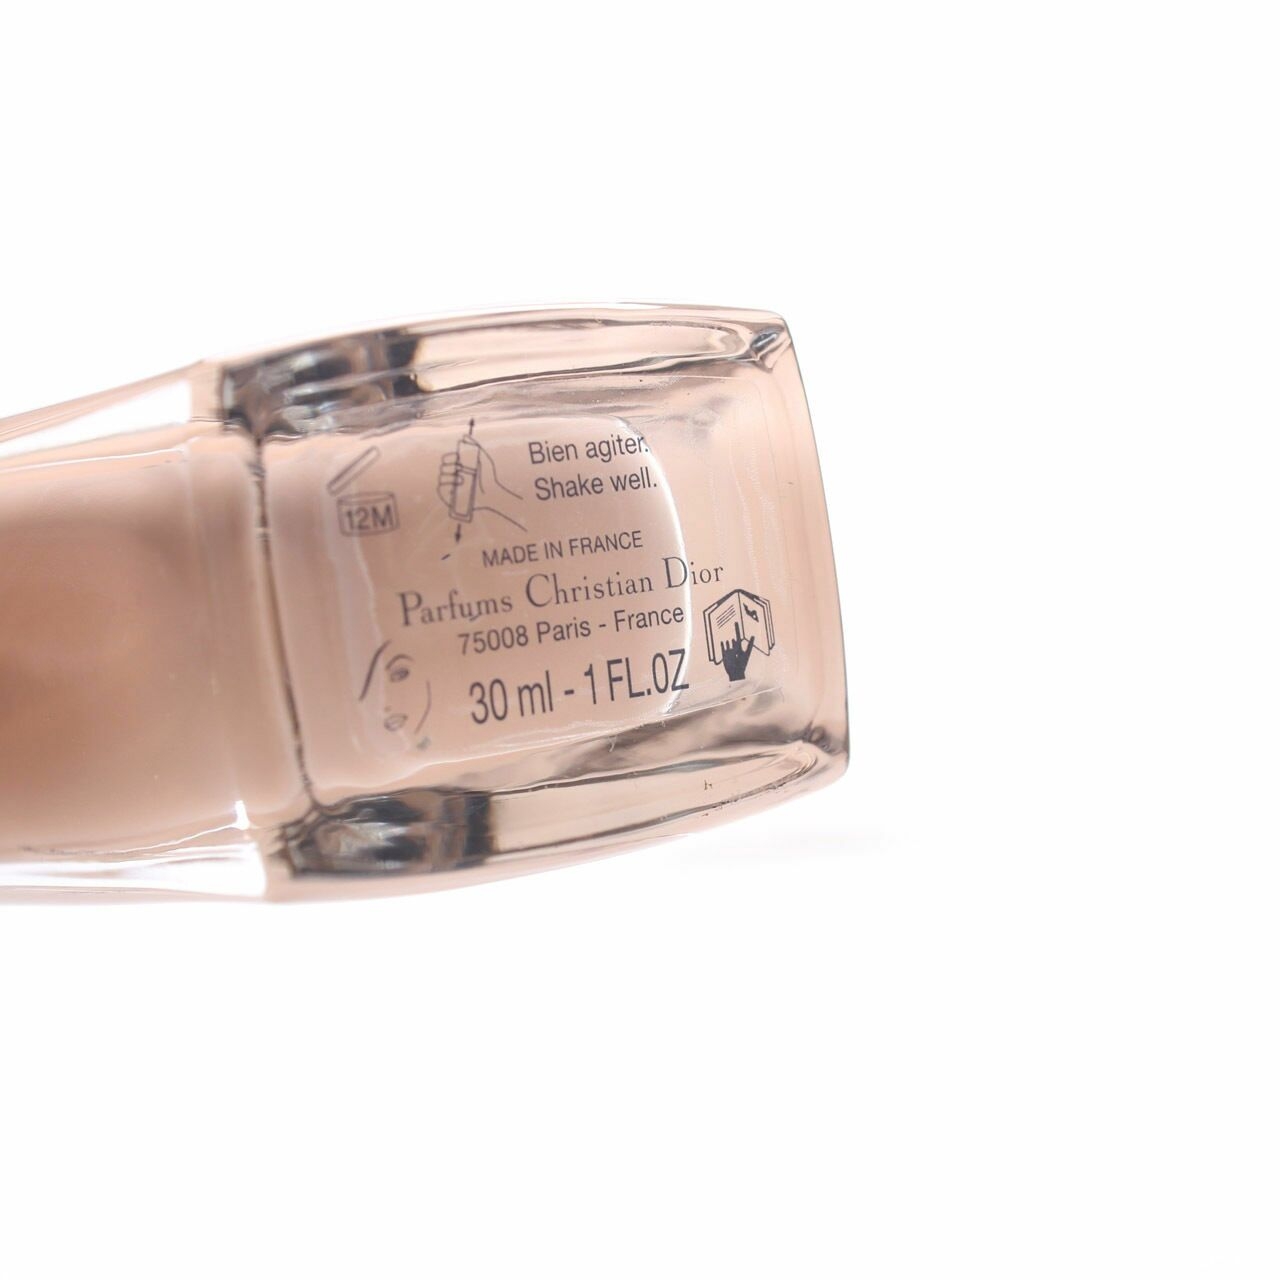 Christian Dior Forever Skin Glow 24H Wear Radiant Perfection Foundation - 2N Faces